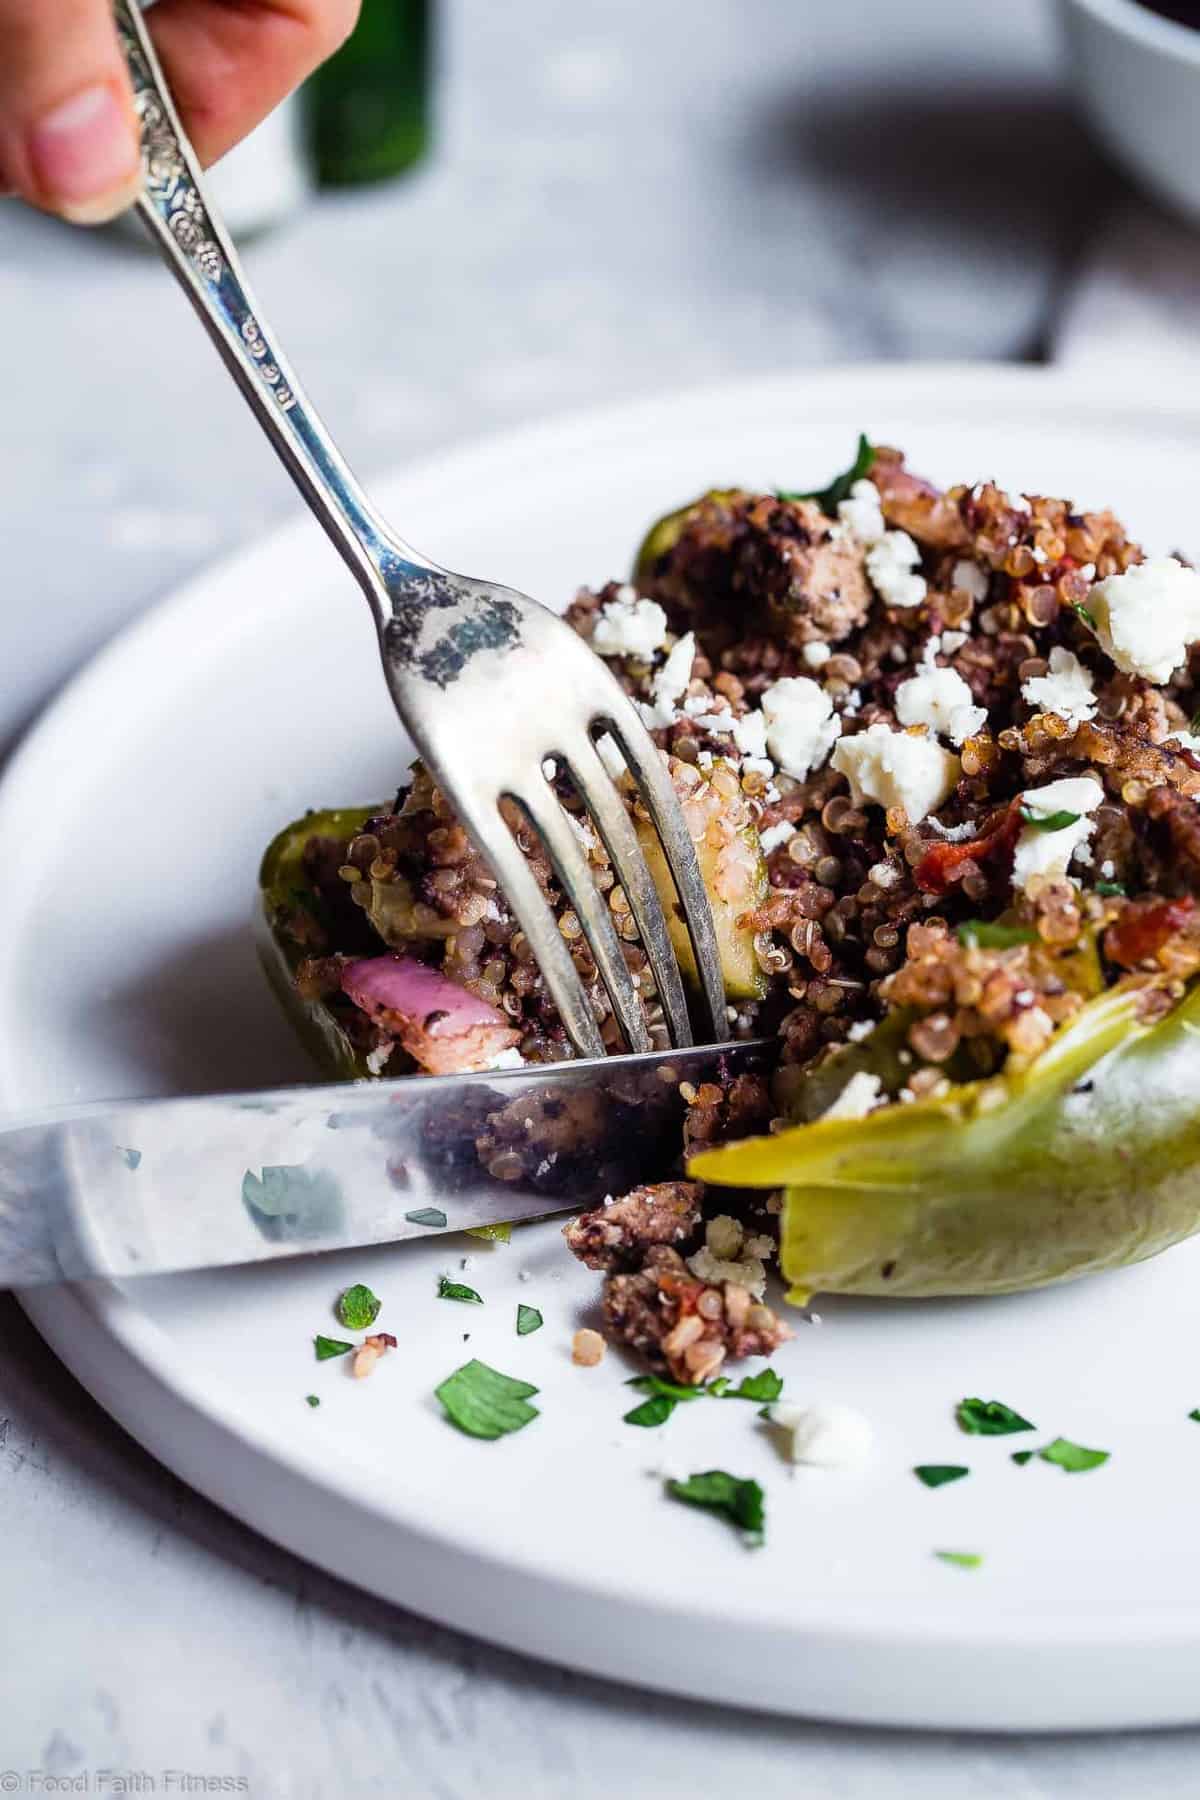 Greek Healthy Turkey Quinoa Stuffed Peppers Recipe - These Turkey Quinoa Stuffed Bell Peppers are an easy, crowd-pleasing, weeknight dinner packed with Greek flavors! Healthy, gluten free, dairy free and SO delicious! | #Foodfaithfitness | #Glutenfree #Healthy #Quinoa #Dairyfree #Dinner